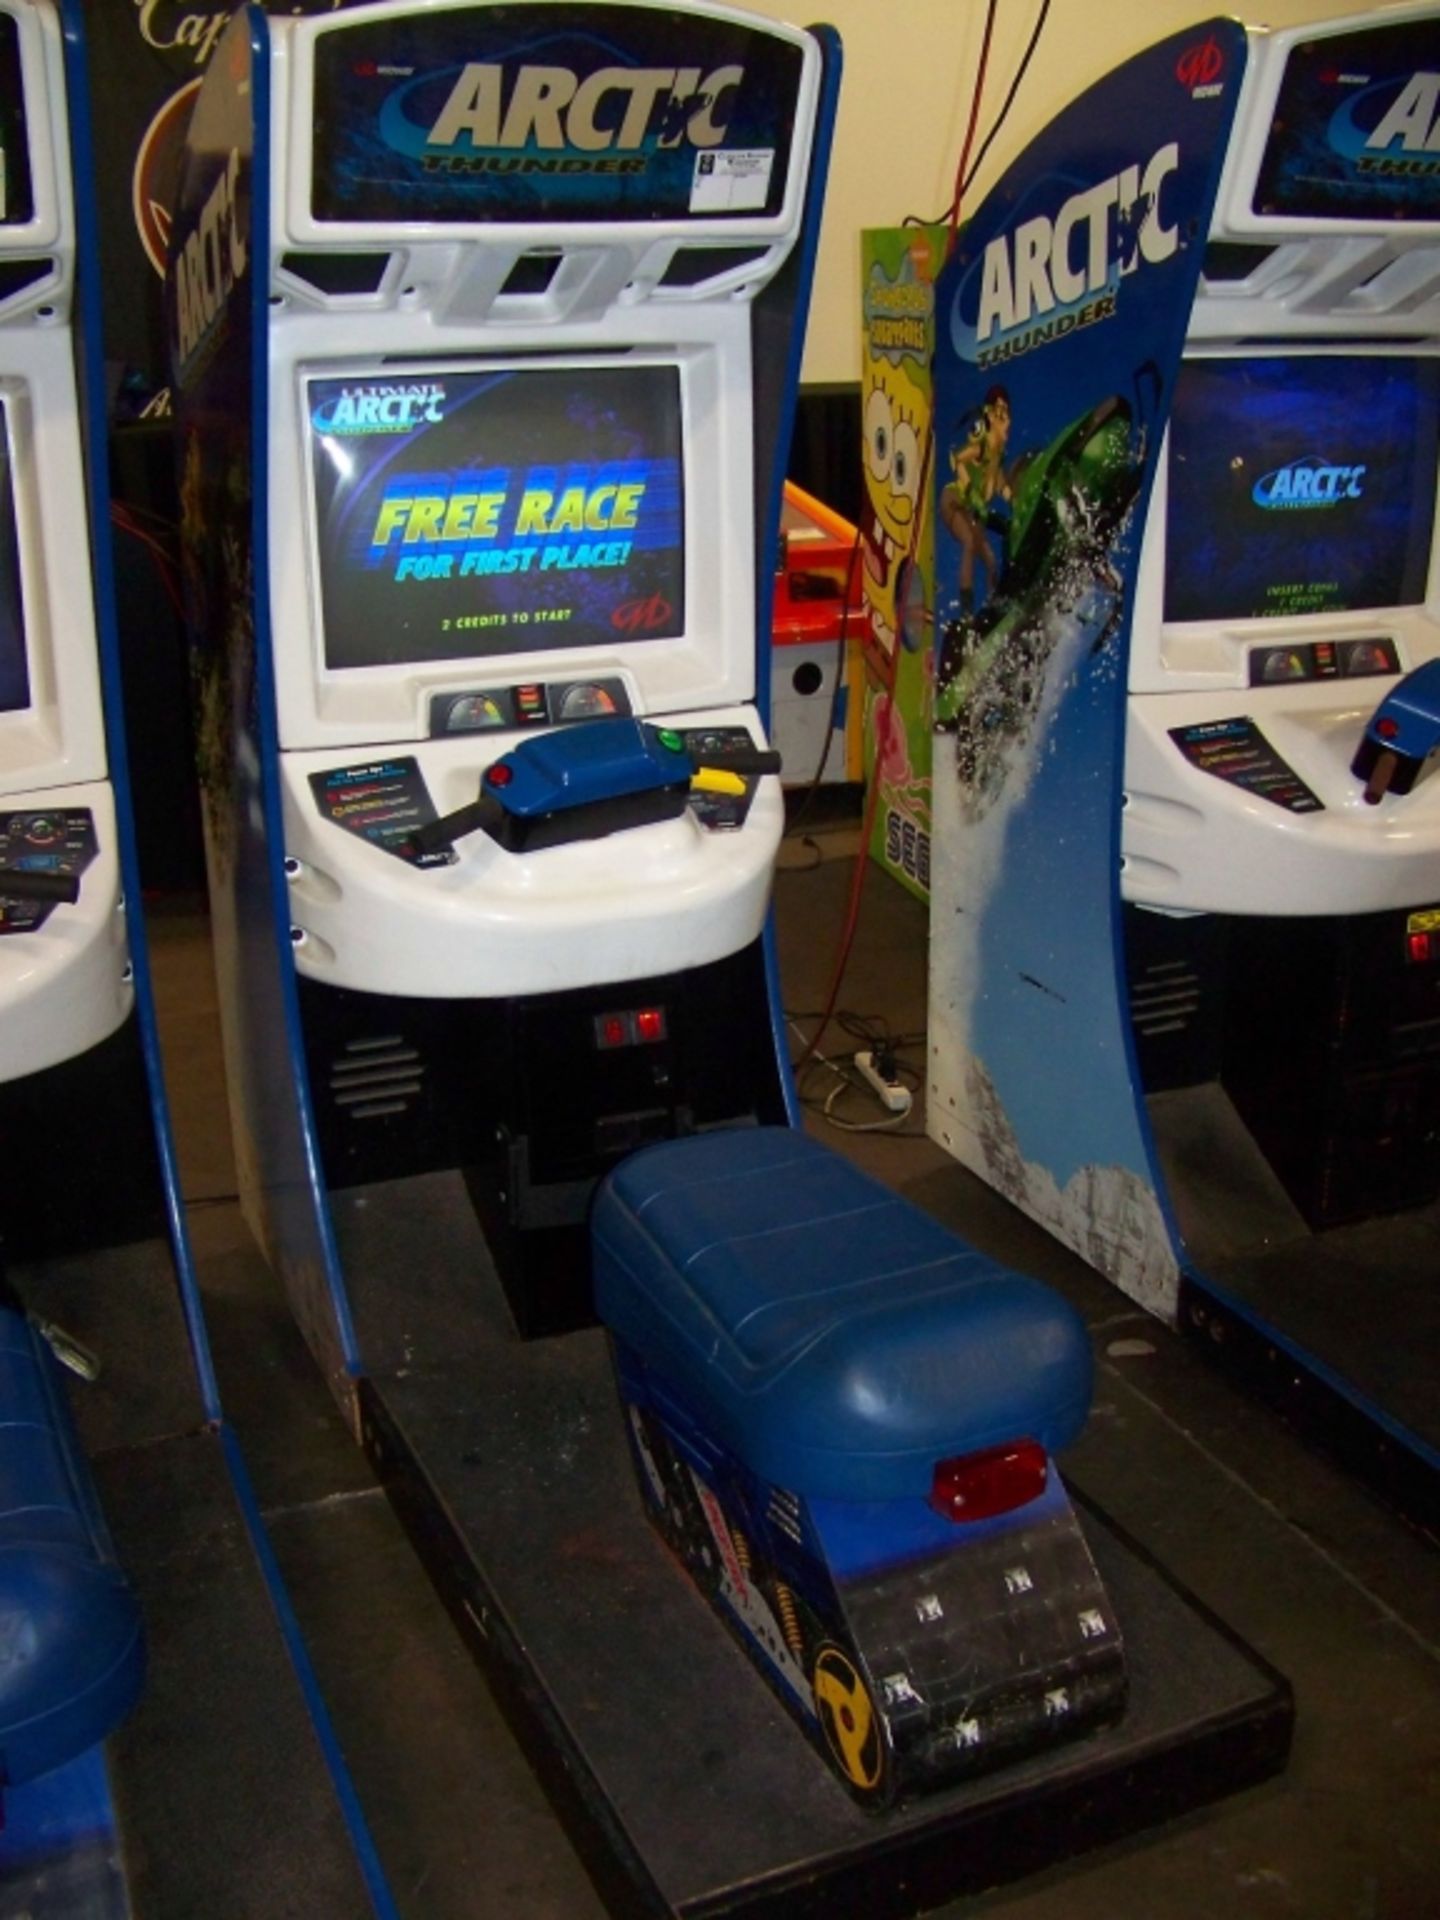 ARCTIC THUNDER ULTIMATE RACING ARCADE GAME - Image 3 of 4